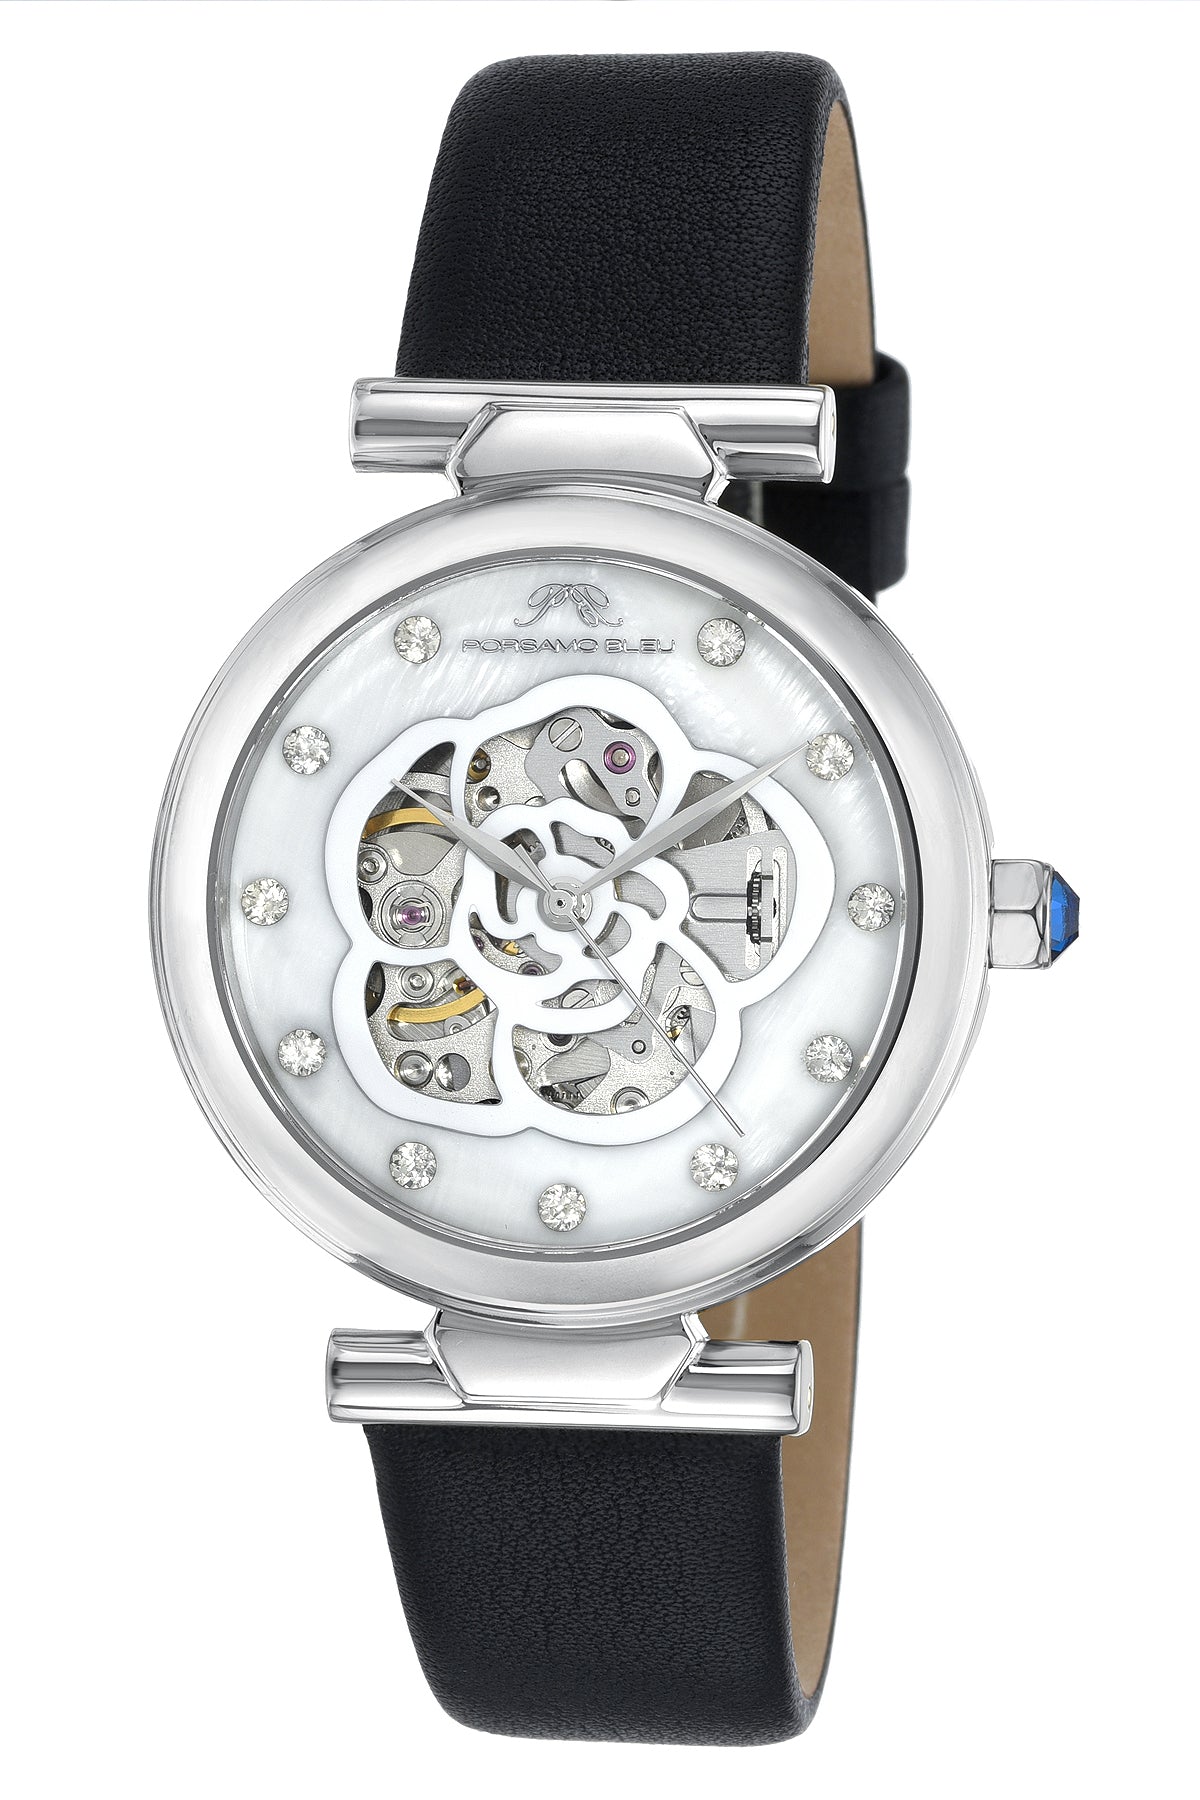 Porsamo Bleu Laura Luxury Automatic Topaz Women's Genuine Leather Band Watch, With Mother Of Pearl Skeleton Dial, Silver, Black 1211ALAL